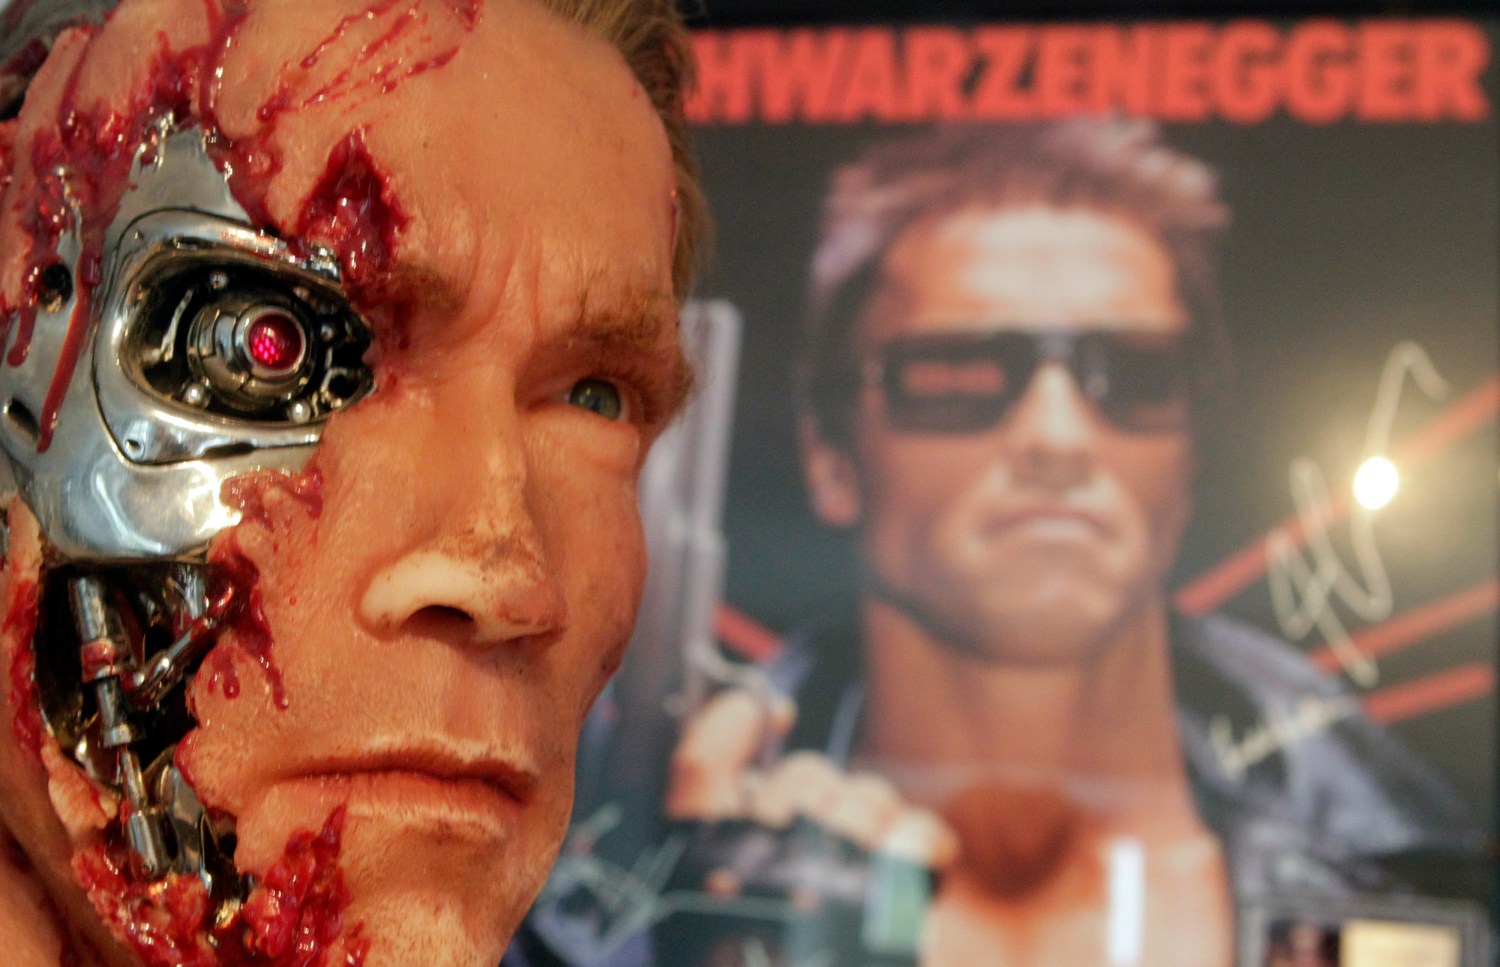 A figure from the movie 'The Terminator' is displayed inside the house where Austrian actor, former champion bodybuilder and former California governor Arnold Schwarzenegger was born, in the southern Austrian village of Thal, October 7, 2011. REUTERS/Herwig Prammer